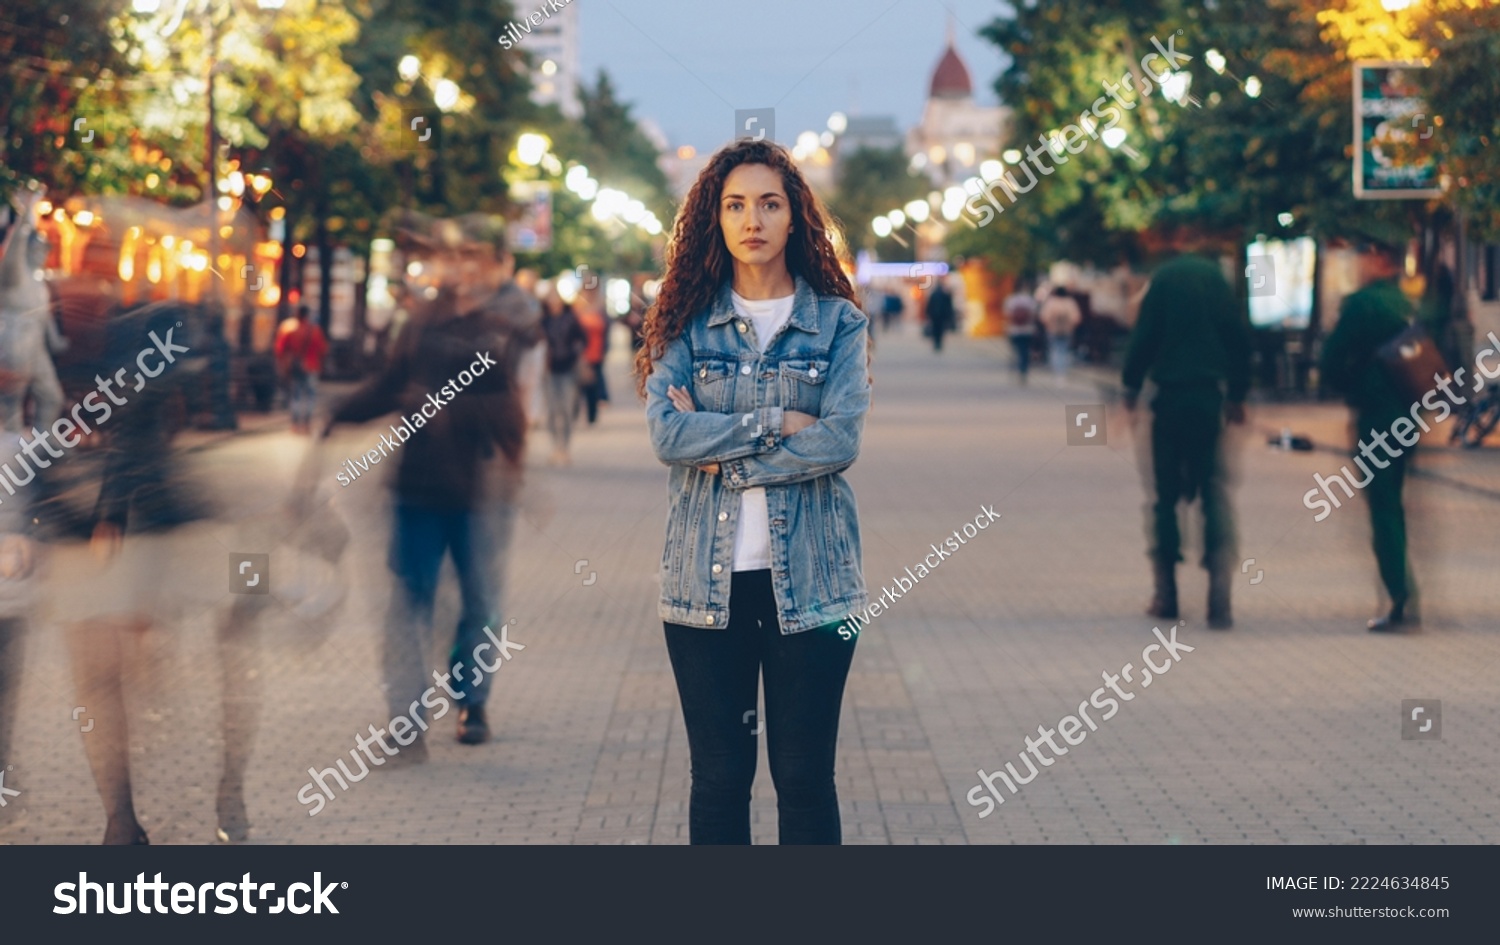 Portrait of stylish young lady tired of usual haste standing in the street among whizzing people and looking at camera. Time, youth and modern society concept. #2224634845